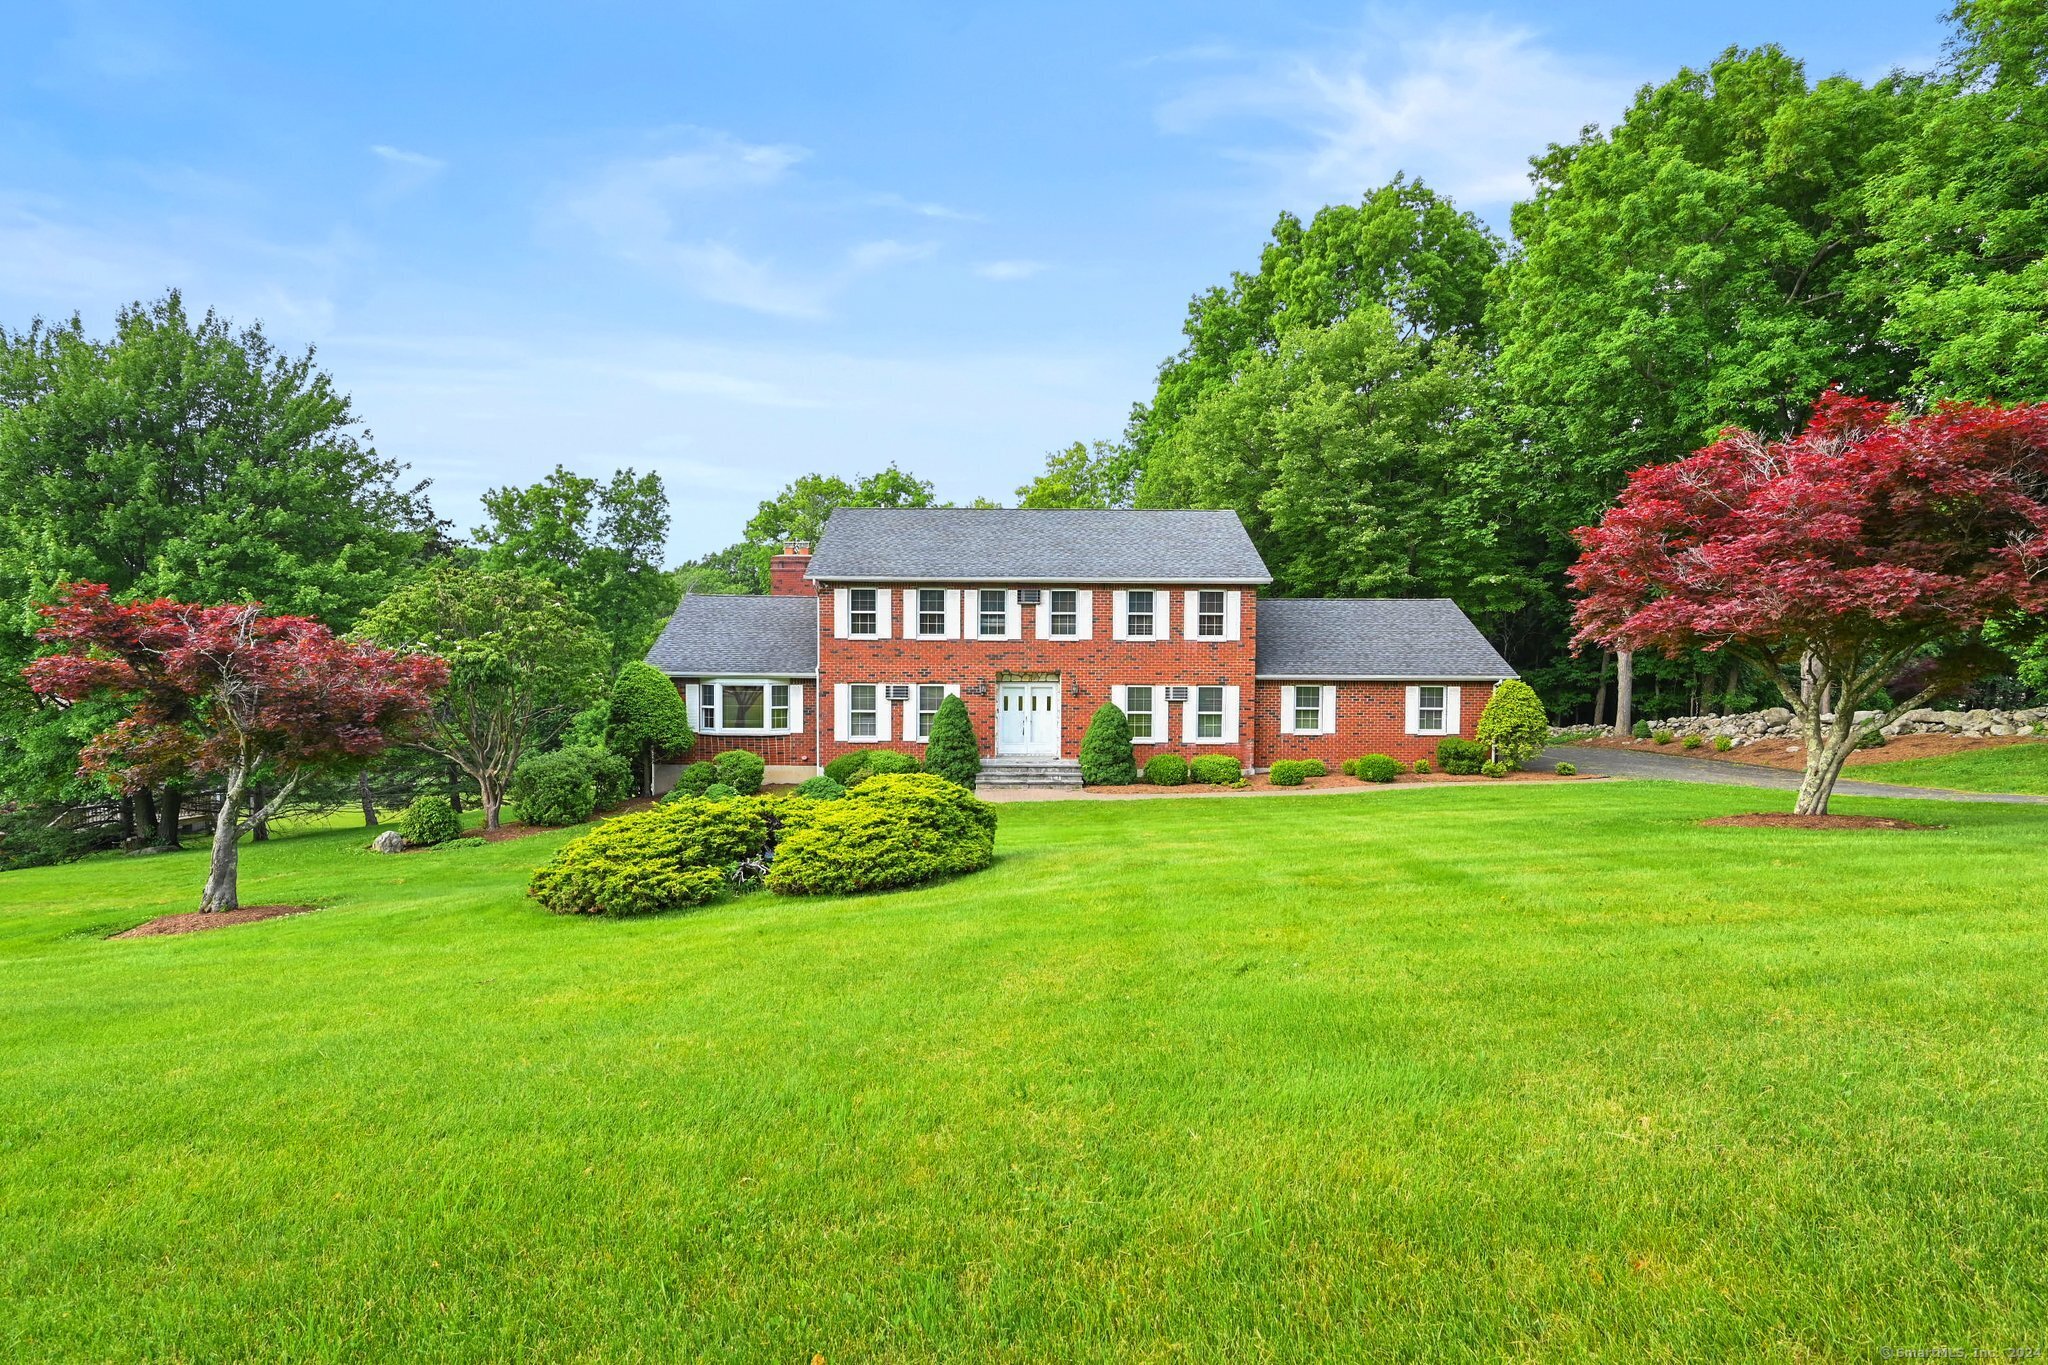 Property for Sale at 9 Carriage Lane, New Fairfield, Connecticut - Bedrooms: 4 
Bathrooms: 3 
Rooms: 8  - $679,900